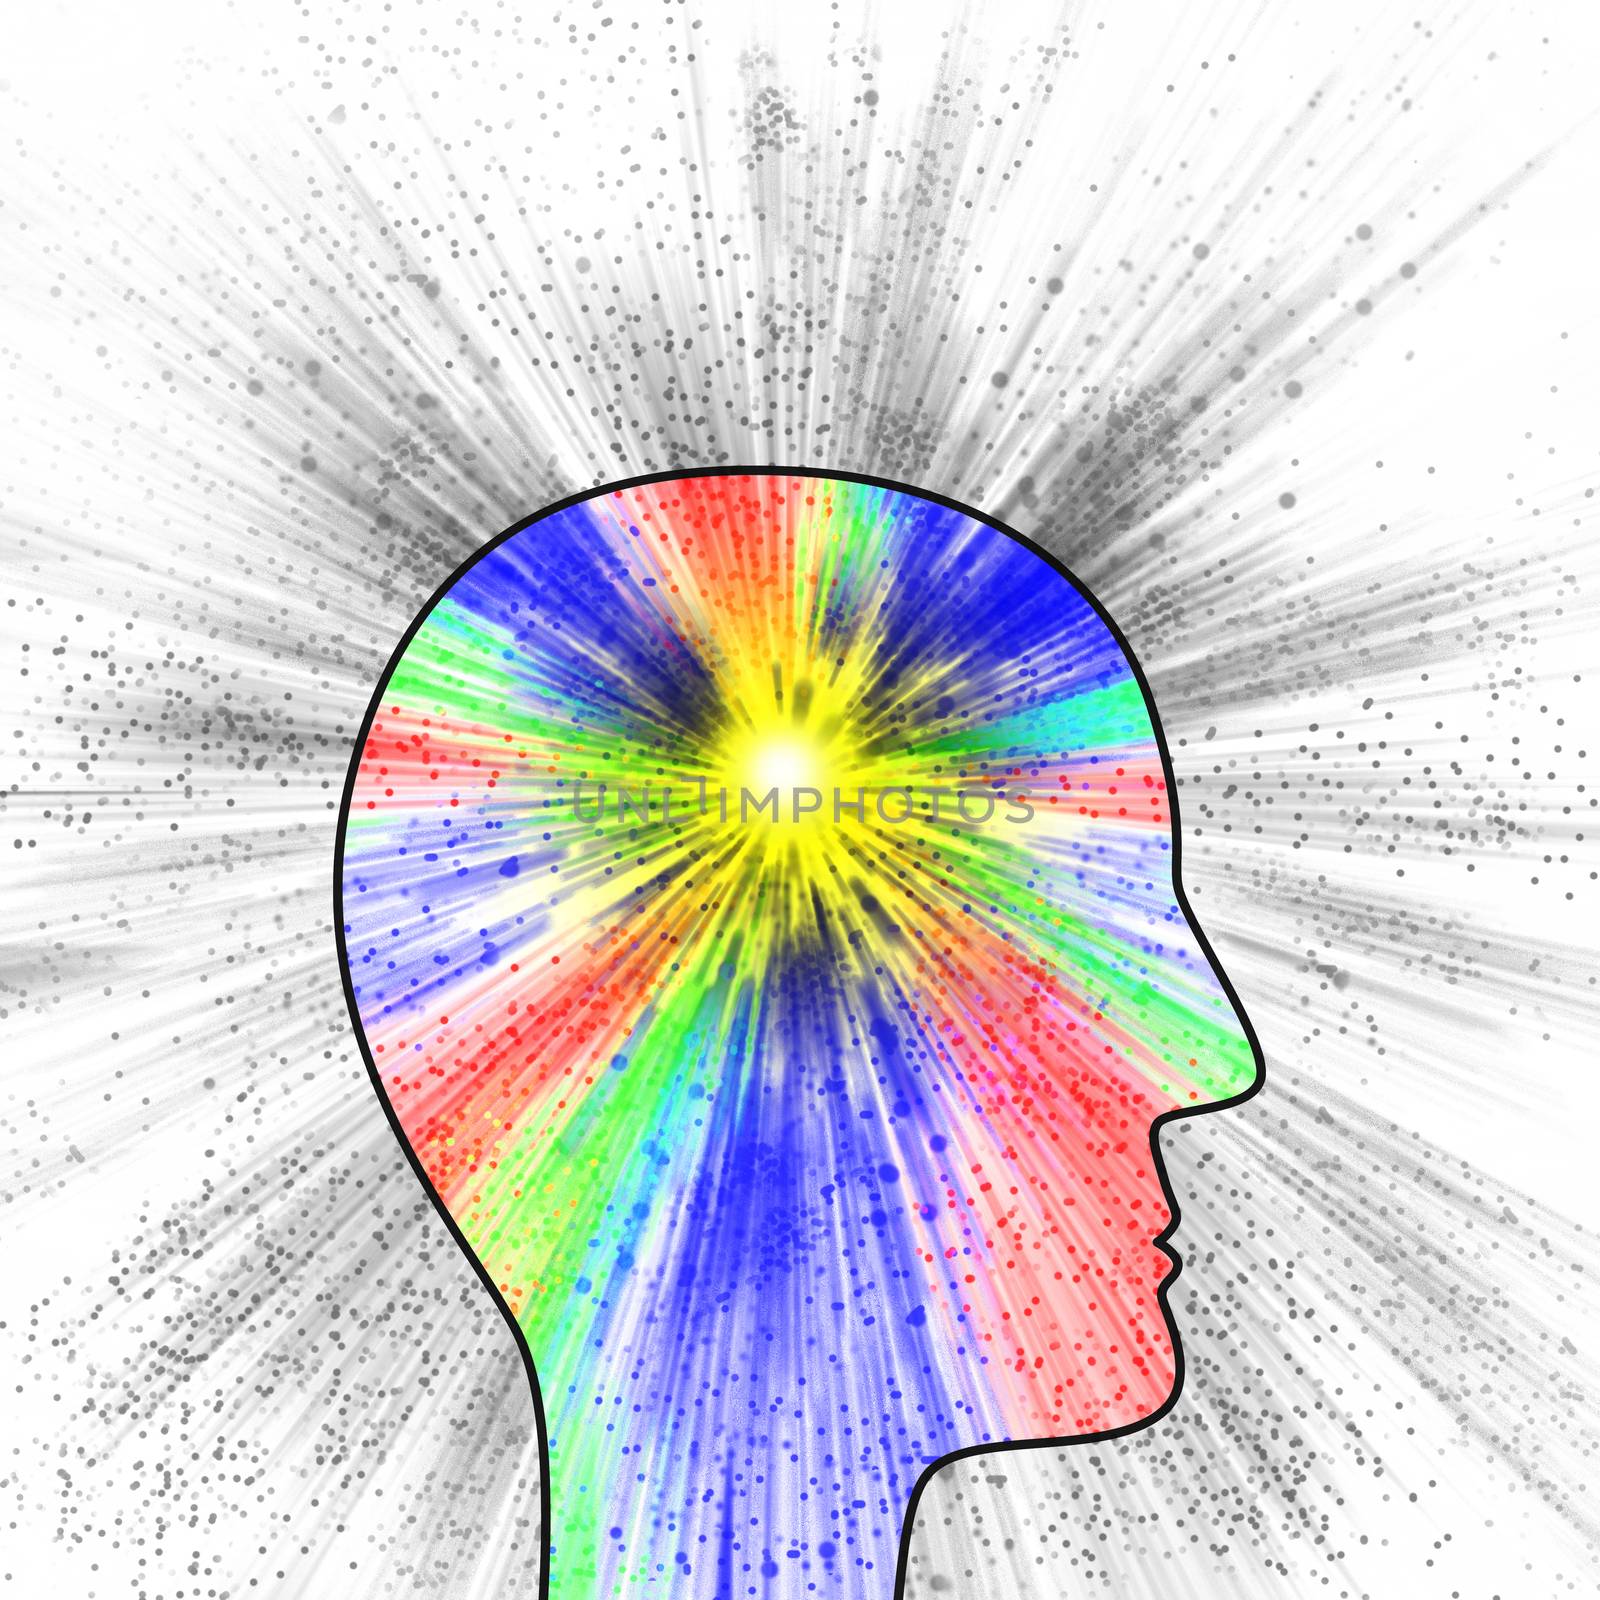 Colorful explosion of thought or pain as suggested by the head profile